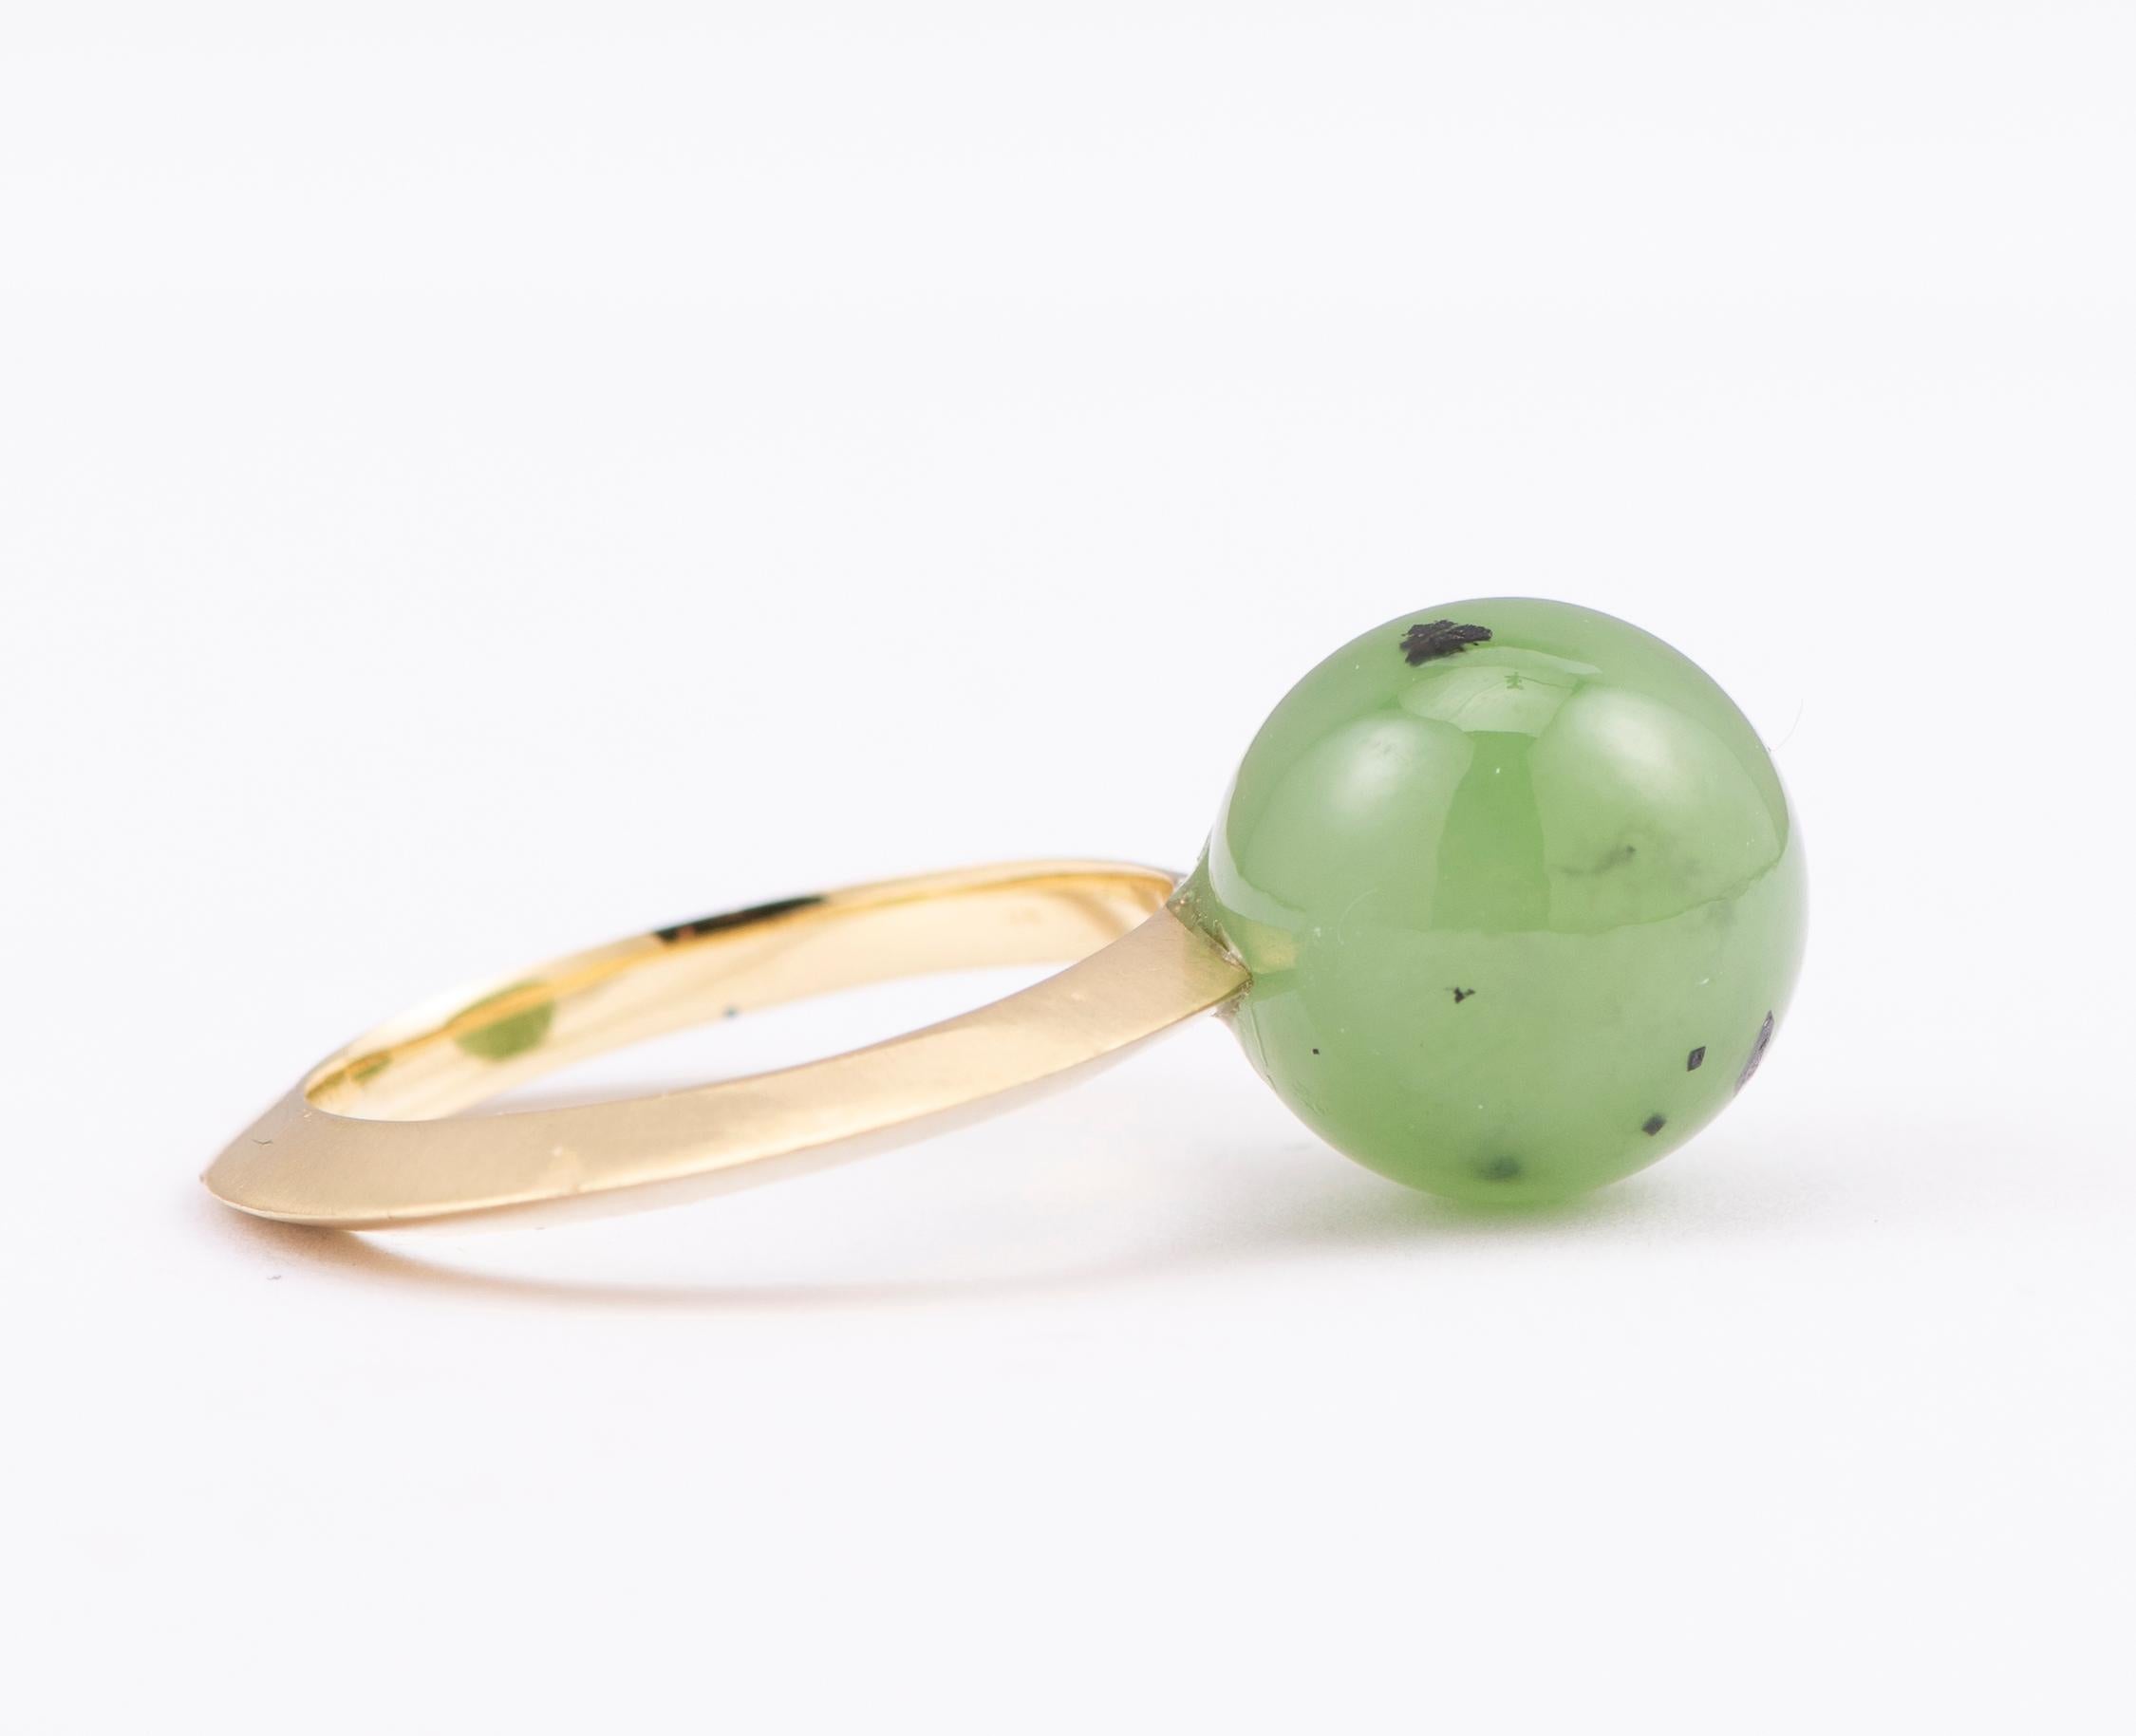 This playful ring can be stacked with our Lapis Lazuli Ball Ring, also listed!  Or wear alone to add a pop of vibrant green to your outfit. A great style for summertime!

12mm Spherical Jade with 18k yellow gold

Finger size 6.75

Los Angeles-based